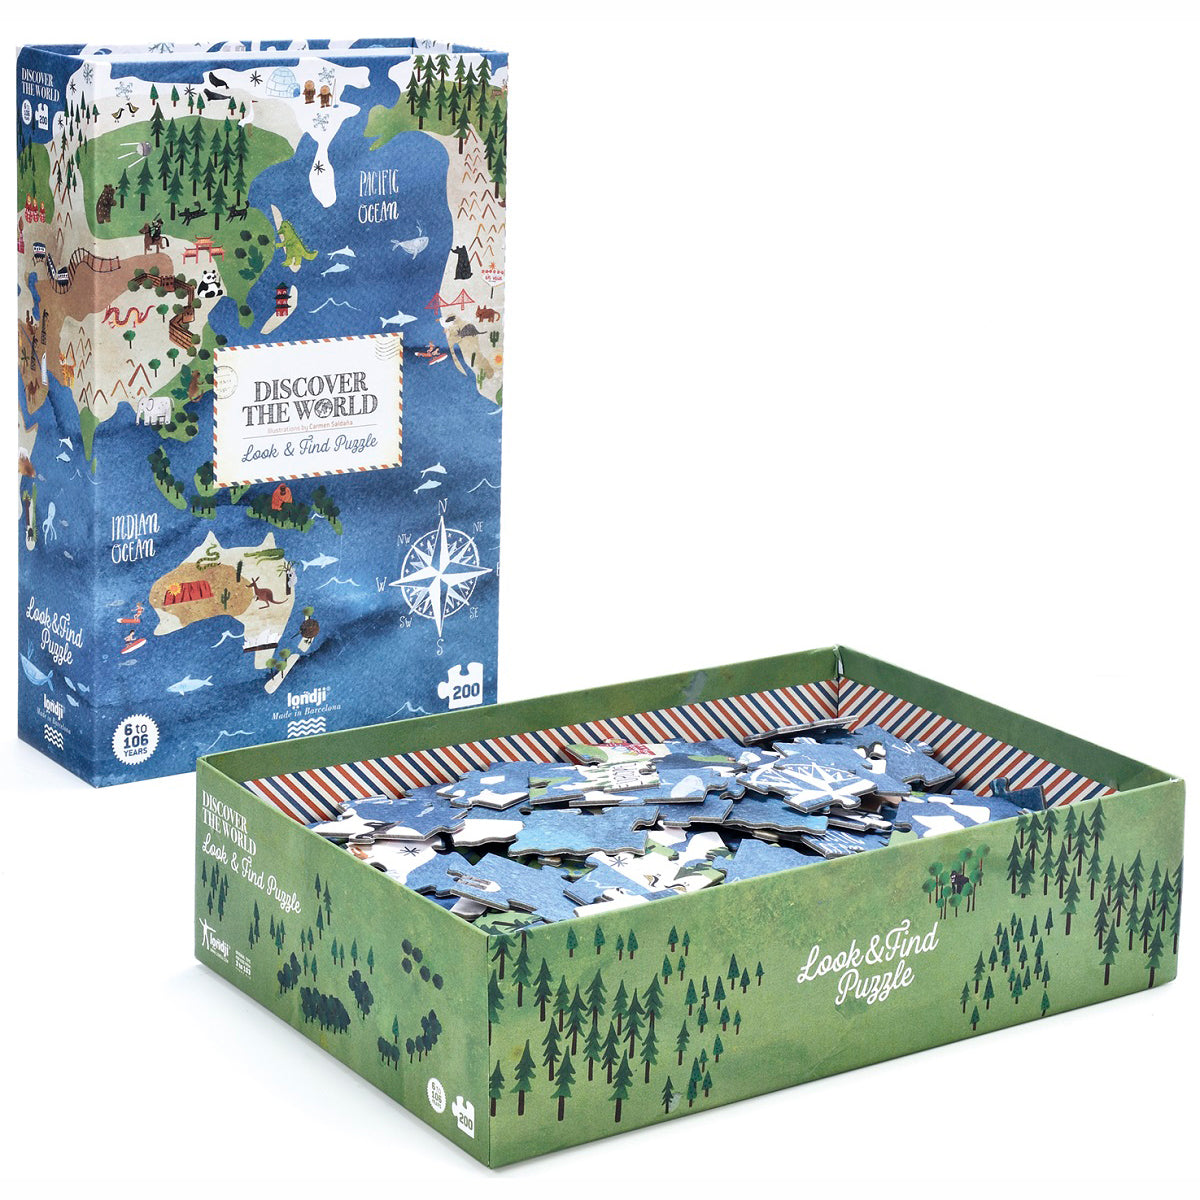 Discover the World 200 piece jigsaw puzzle